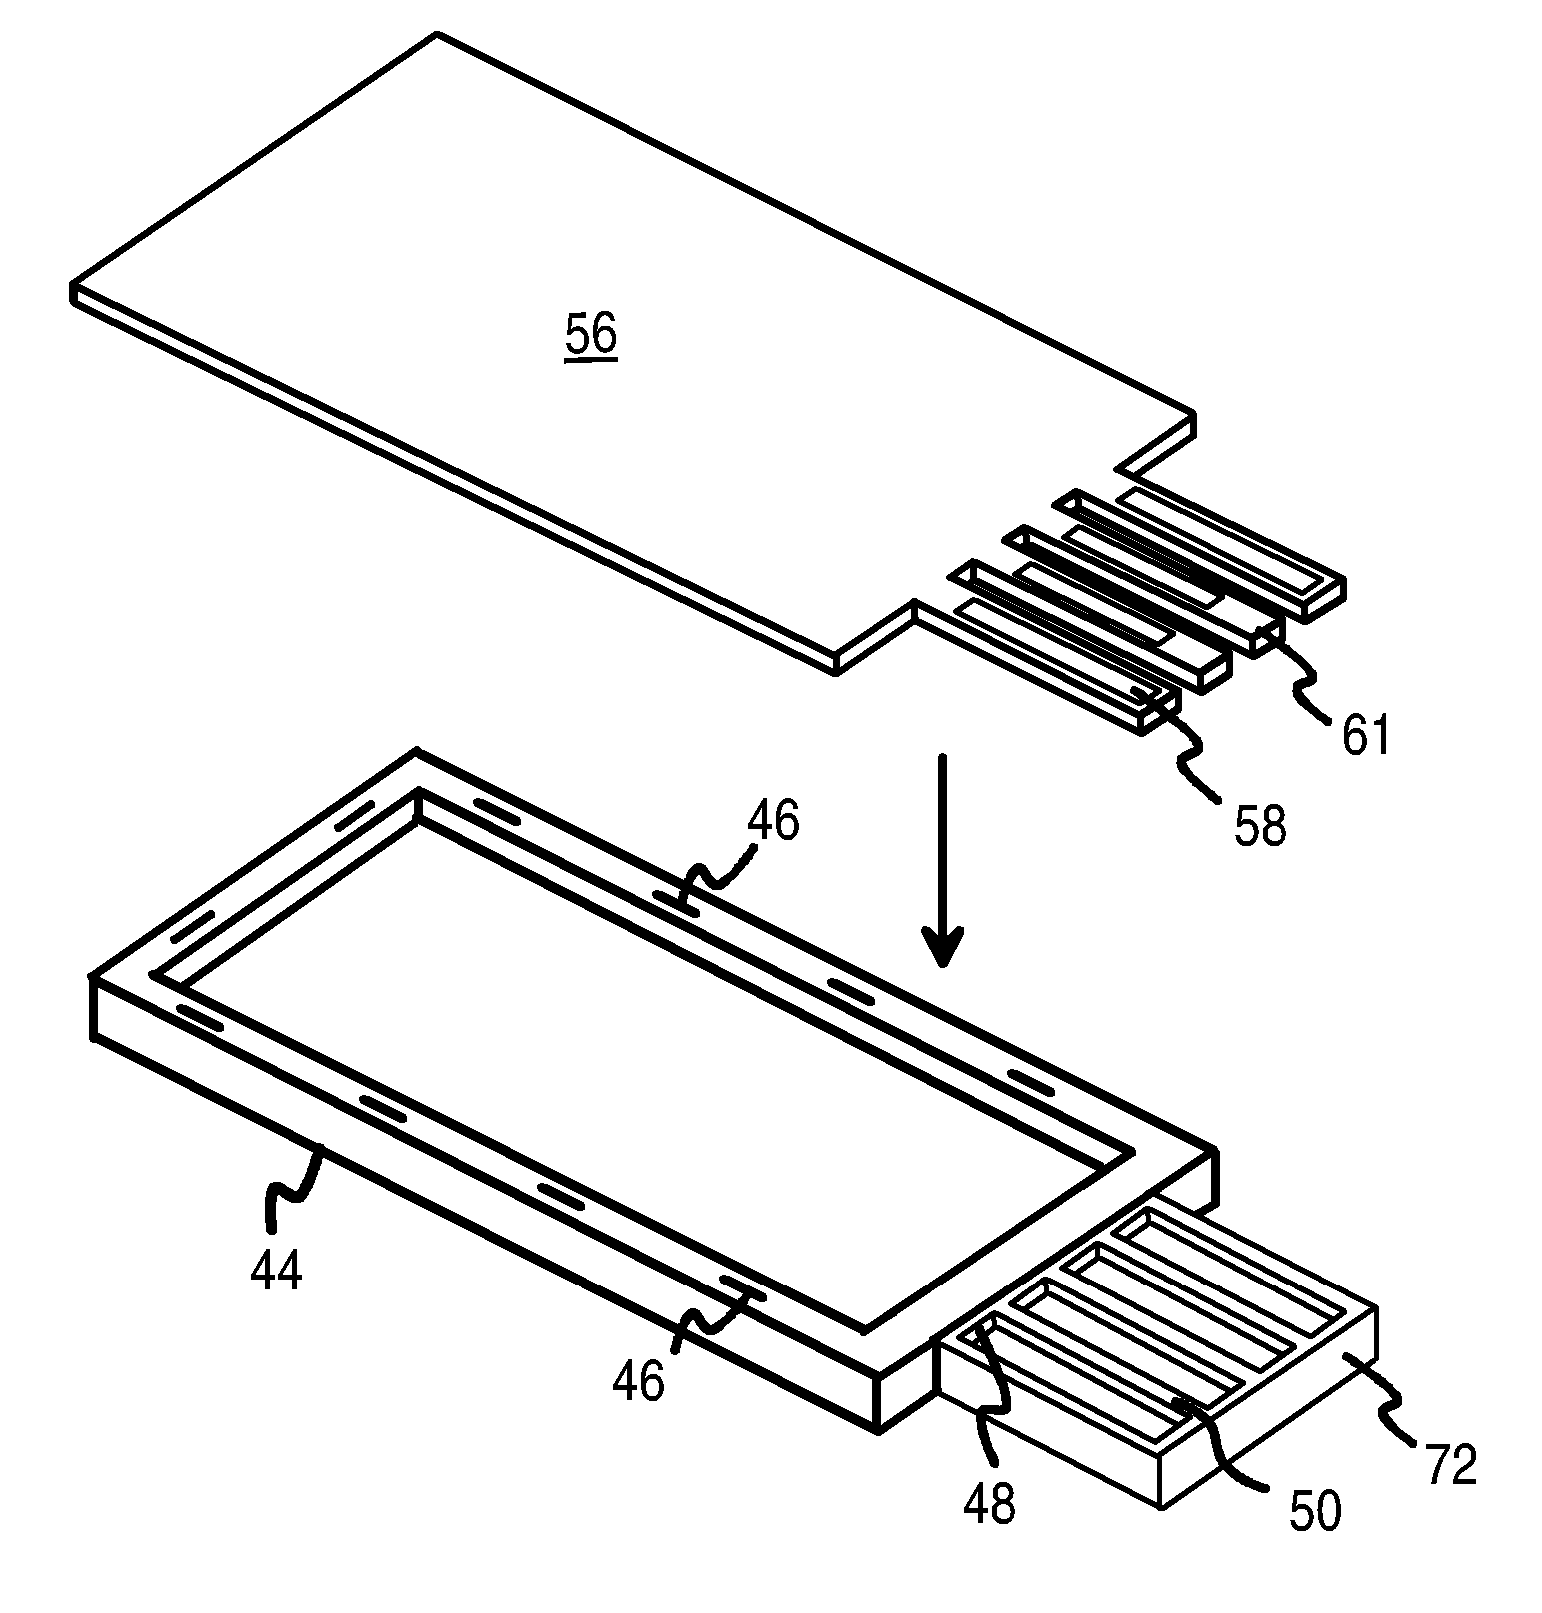 USB flash-memory card with perimeter frame and covers that allow mounting of chips on both sides of a PCB